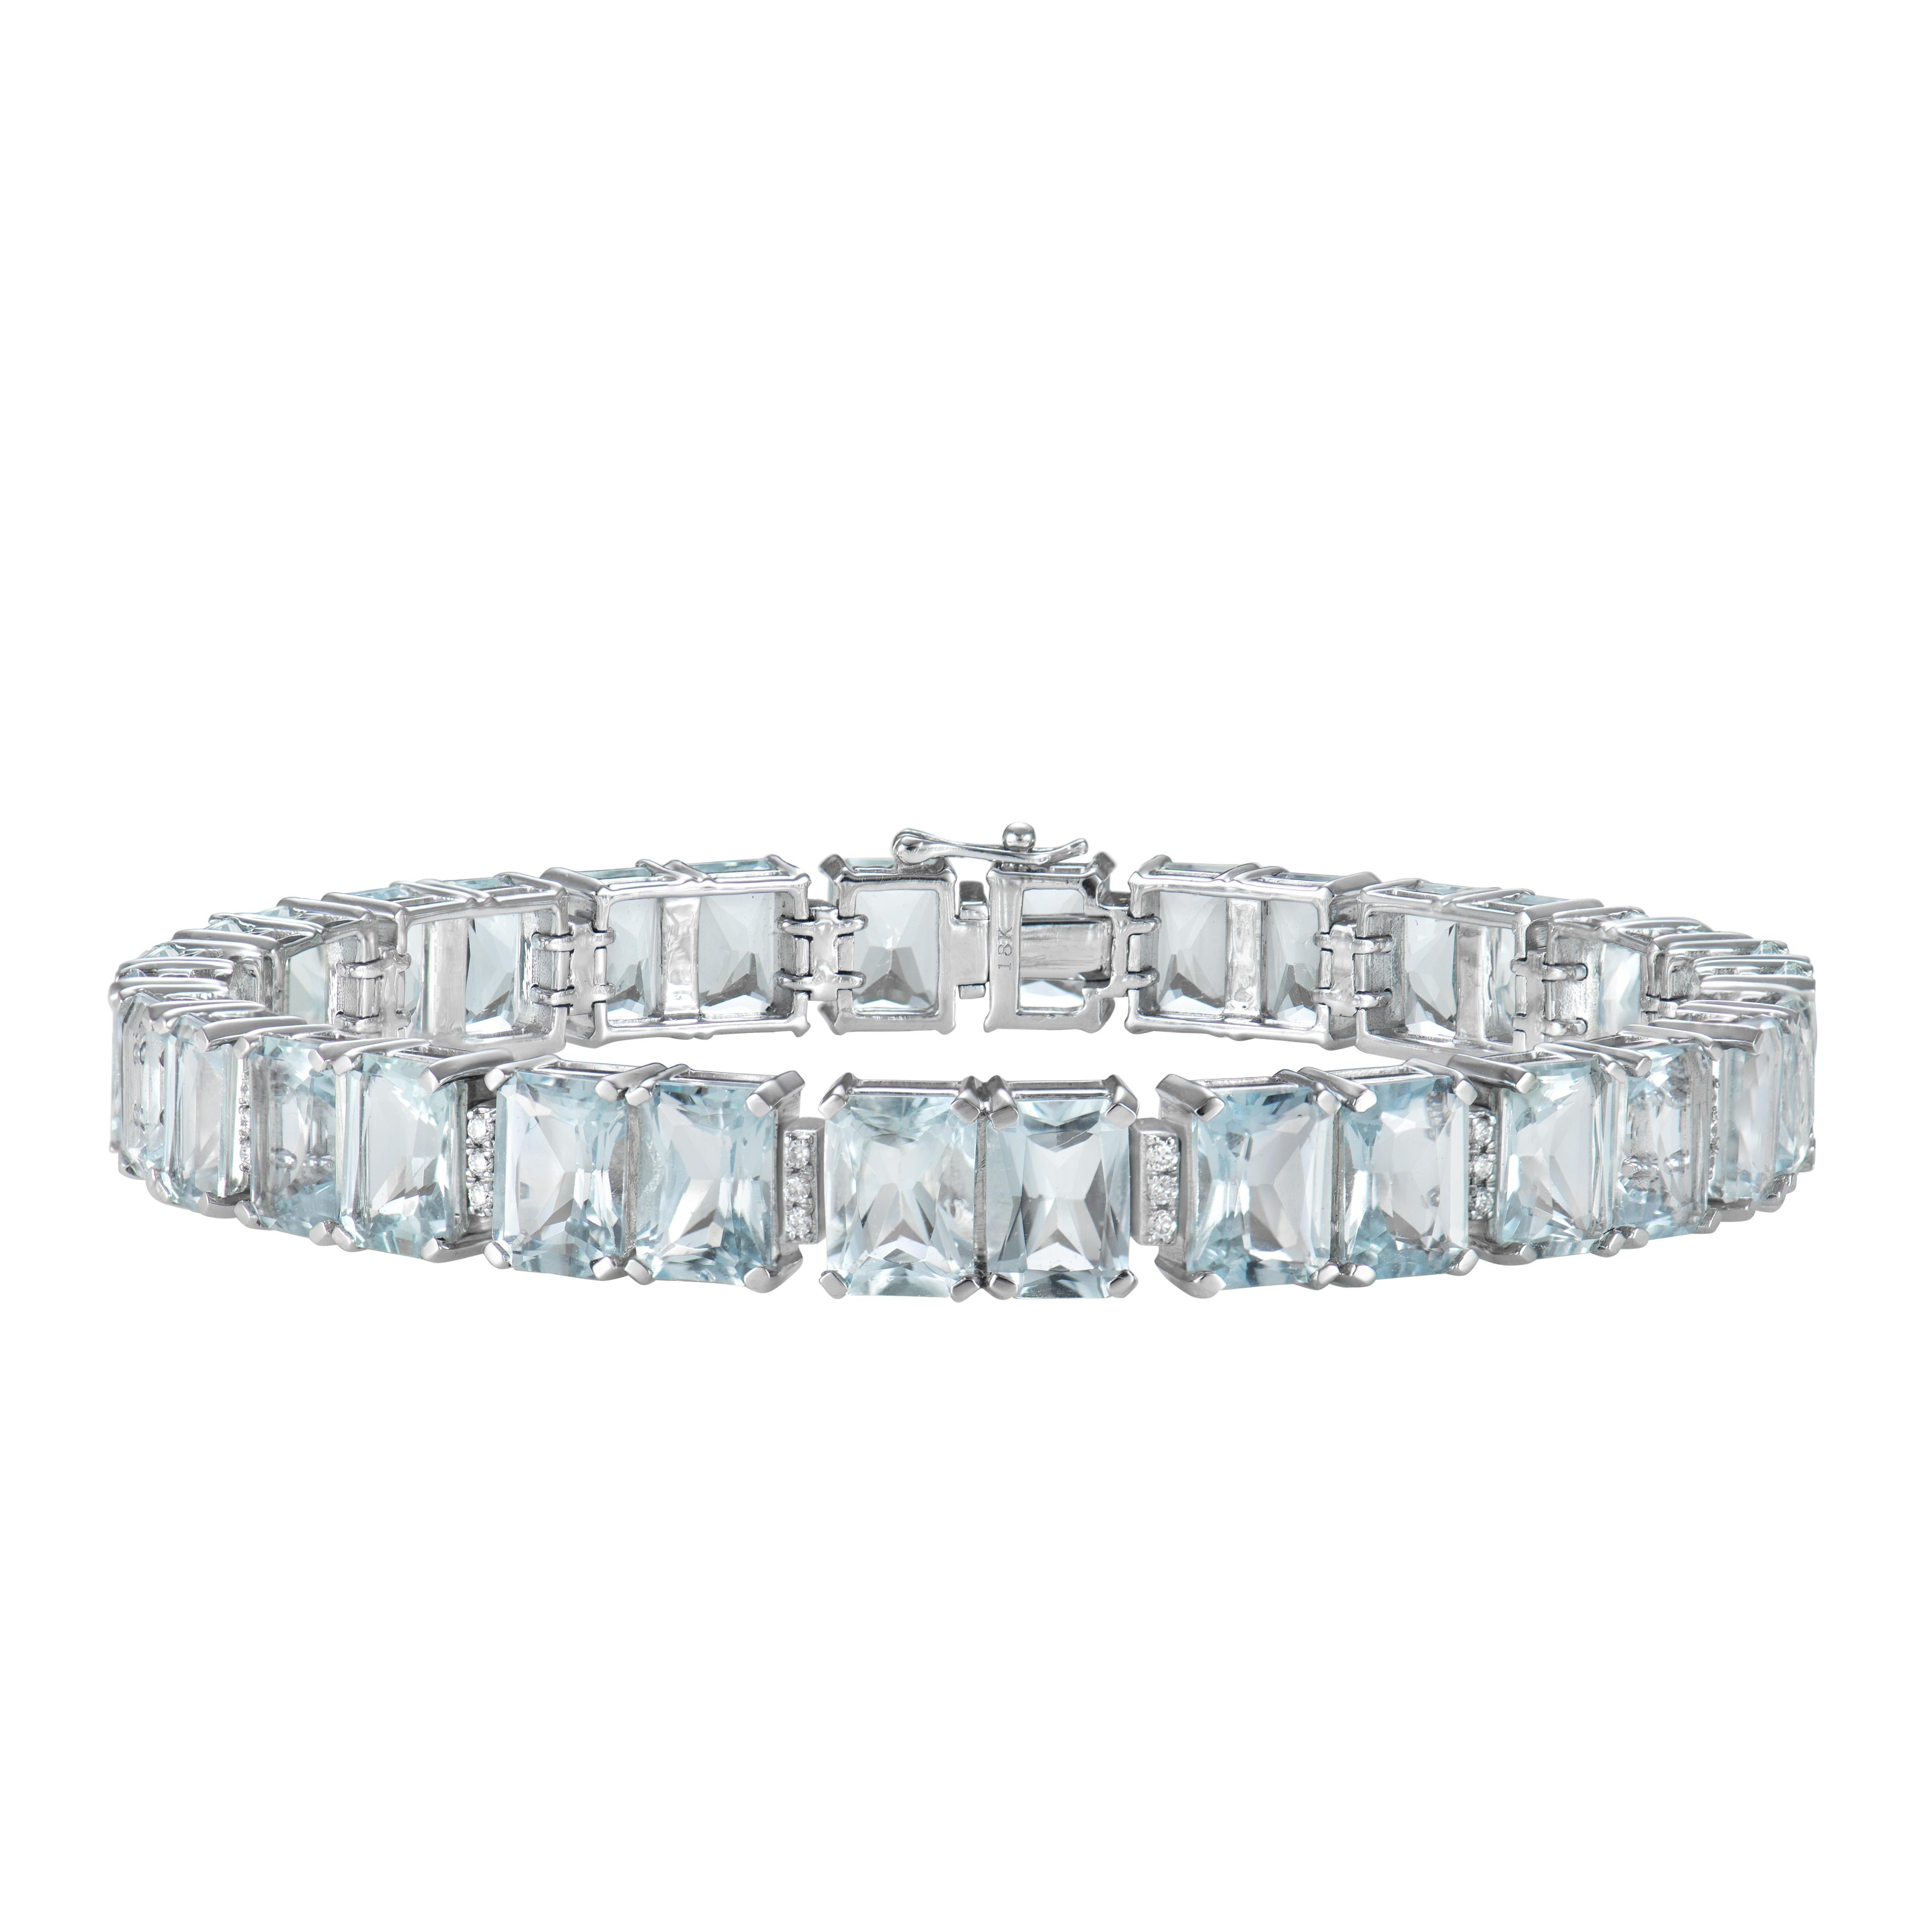 This collection features an array of aquamarines with an icy blue hue that is as cool as it gets! Accented with diamonds these pieces are made in white gold and present a classic yet elegant look. 

Aquamarine Bracelet in 18 Karat White Gold with